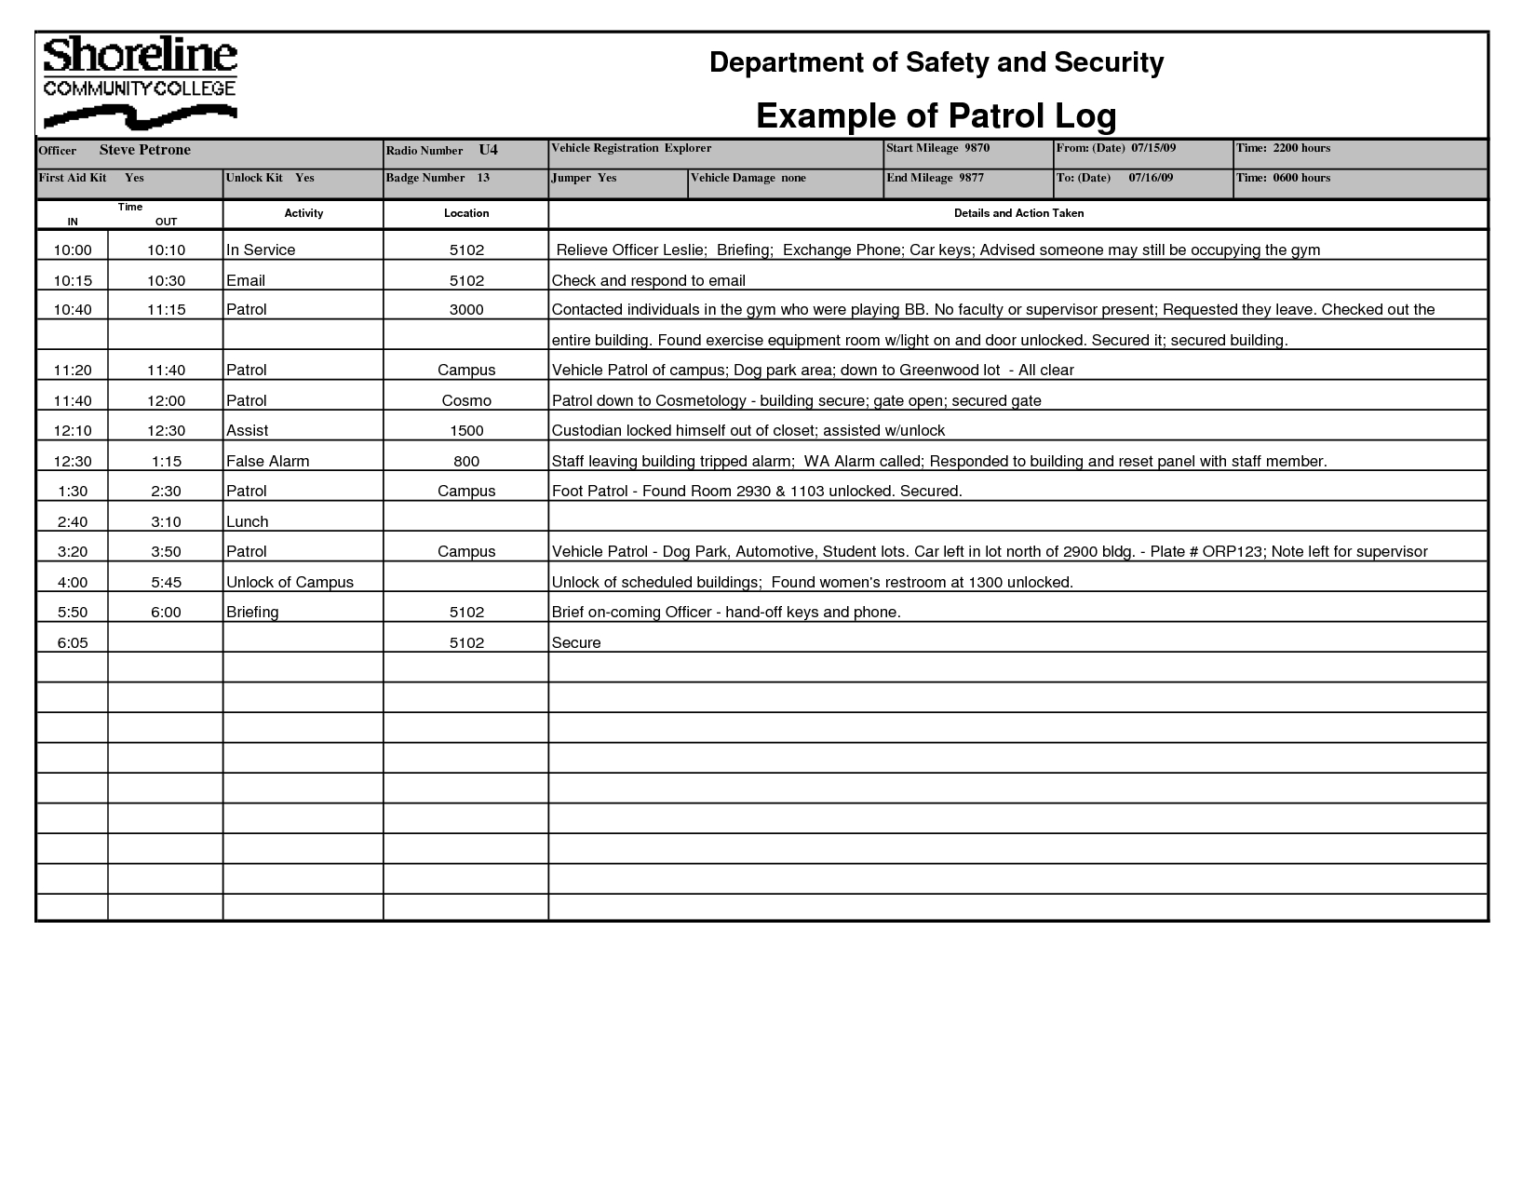 security-officer-daily-log-template-example-patrol-log-pertaining-to